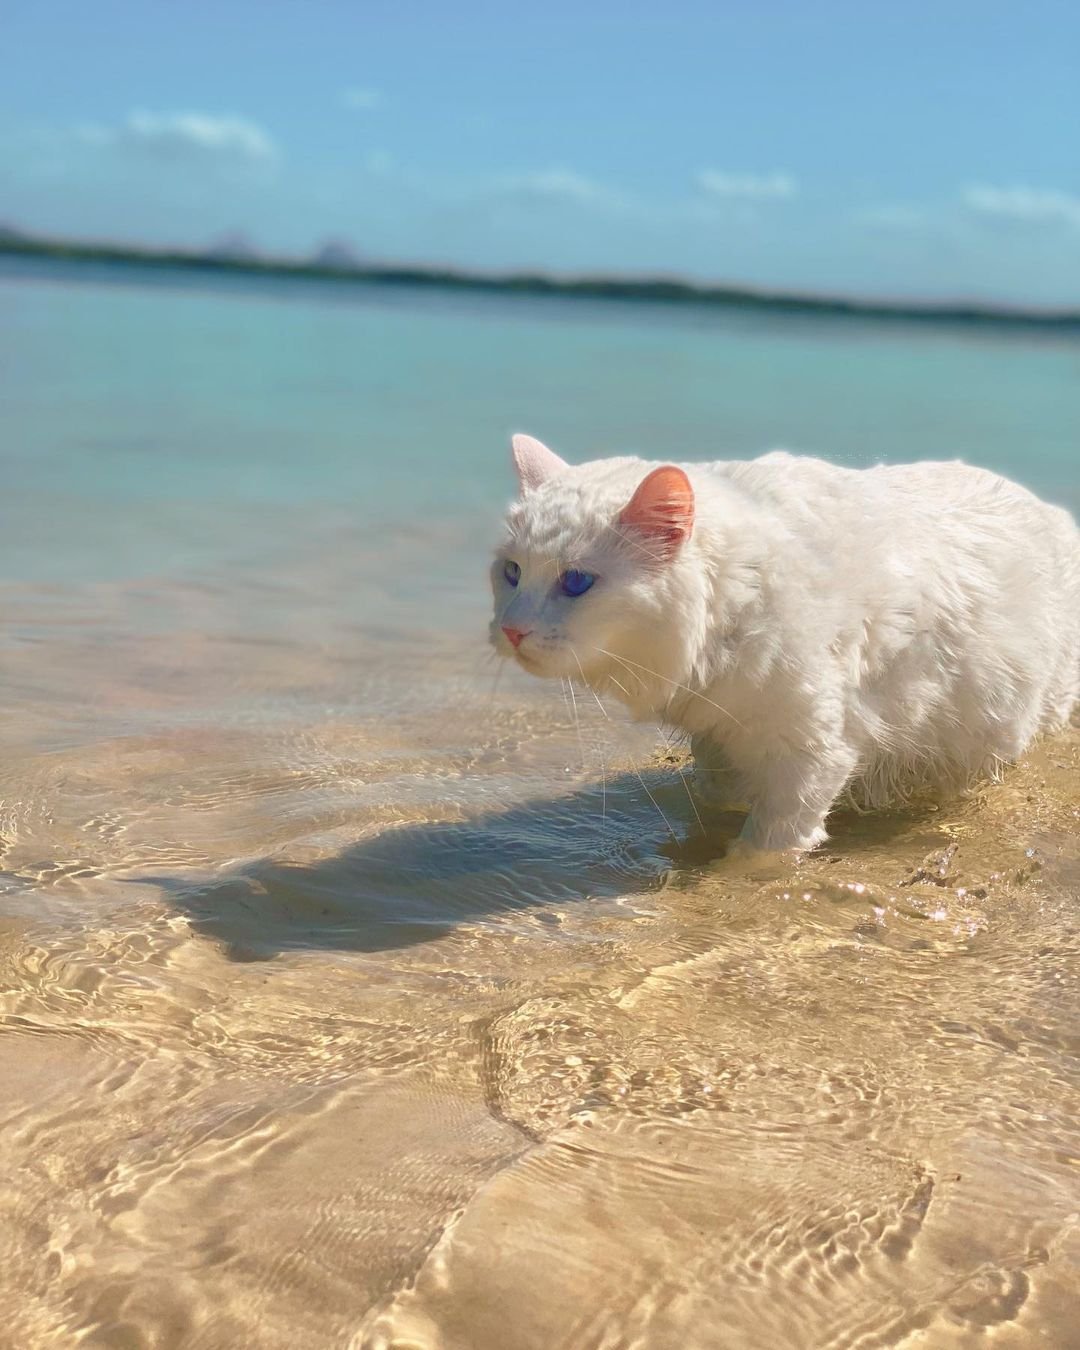 Who else is ready for the beach and for summer??!!! 🏖️ 🐚 🐠 🌴 🌺 ☀️ 

📸: @skittles_and_gingin

#EvolvePets #ChooseEvolve #BeachVibes